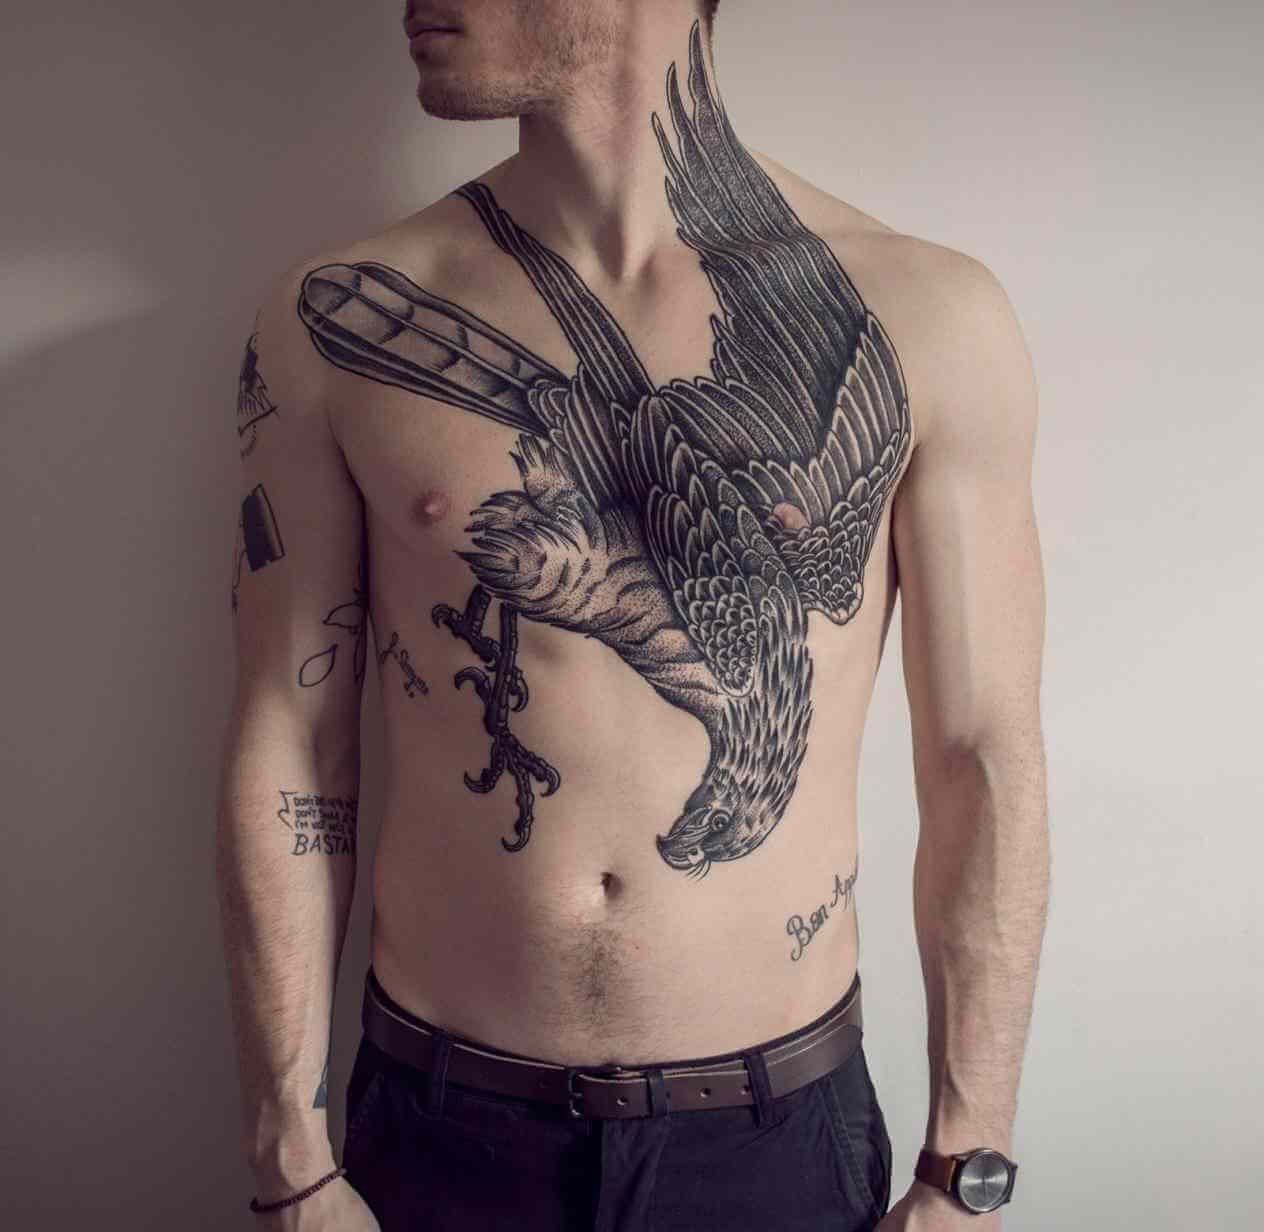 The 100 Best Chest Tattoos For Men Improb within dimensions 1264 X 1232